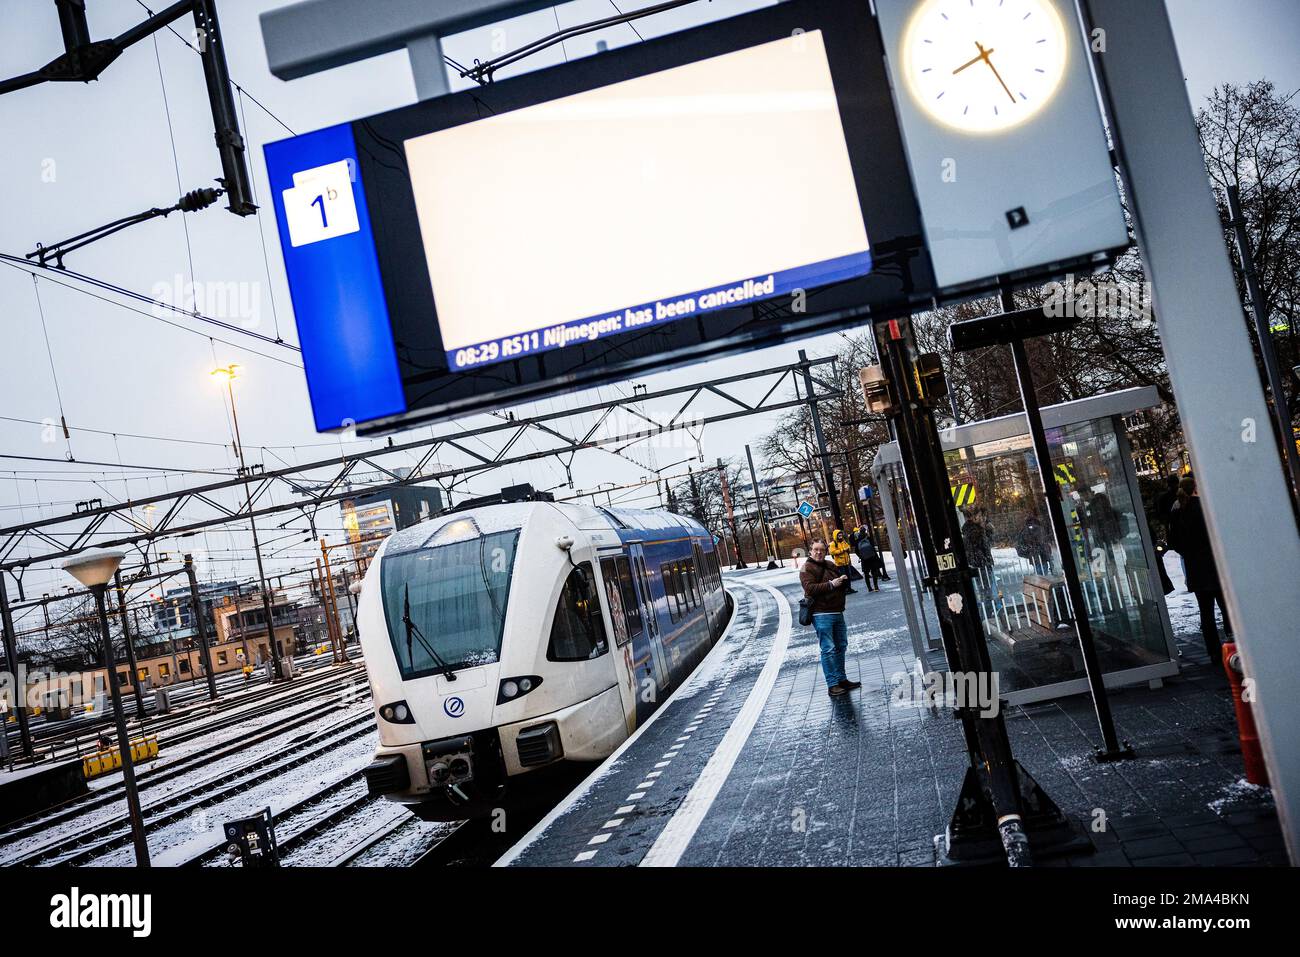 VENLO - Passengers at Venlo station wait in vain for the train. Thousands of bus drivers, train drivers and conductors in regional transport stopped working after failed collective bargaining. ANP ROB ENGELAAR netherlands out - belgium out Stock Photo